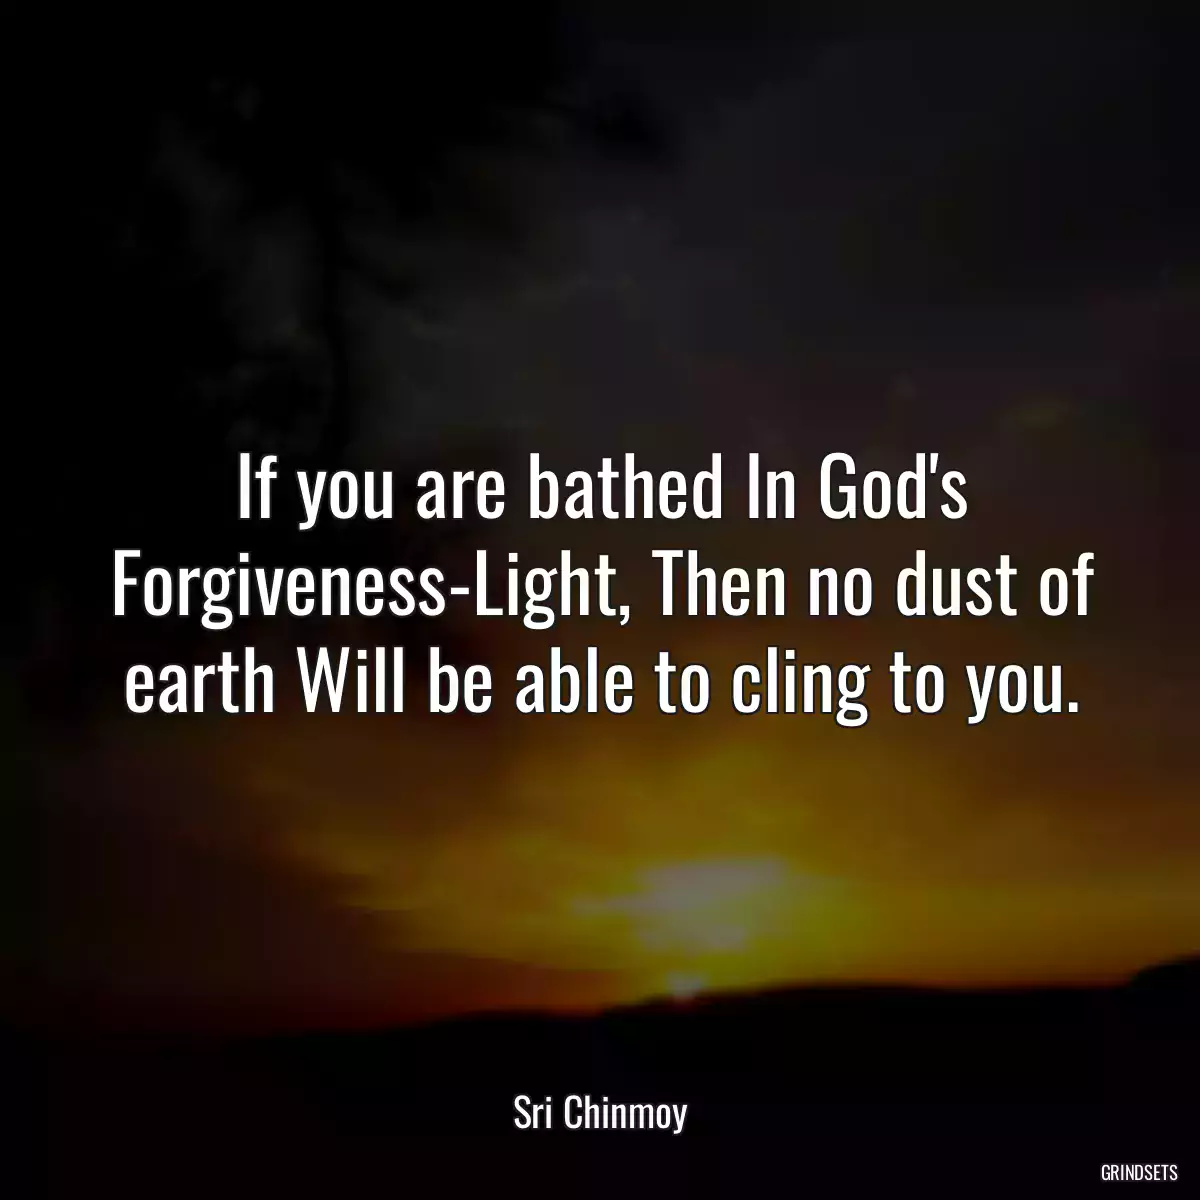 If you are bathed In God\'s Forgiveness-Light, Then no dust of earth Will be able to cling to you.